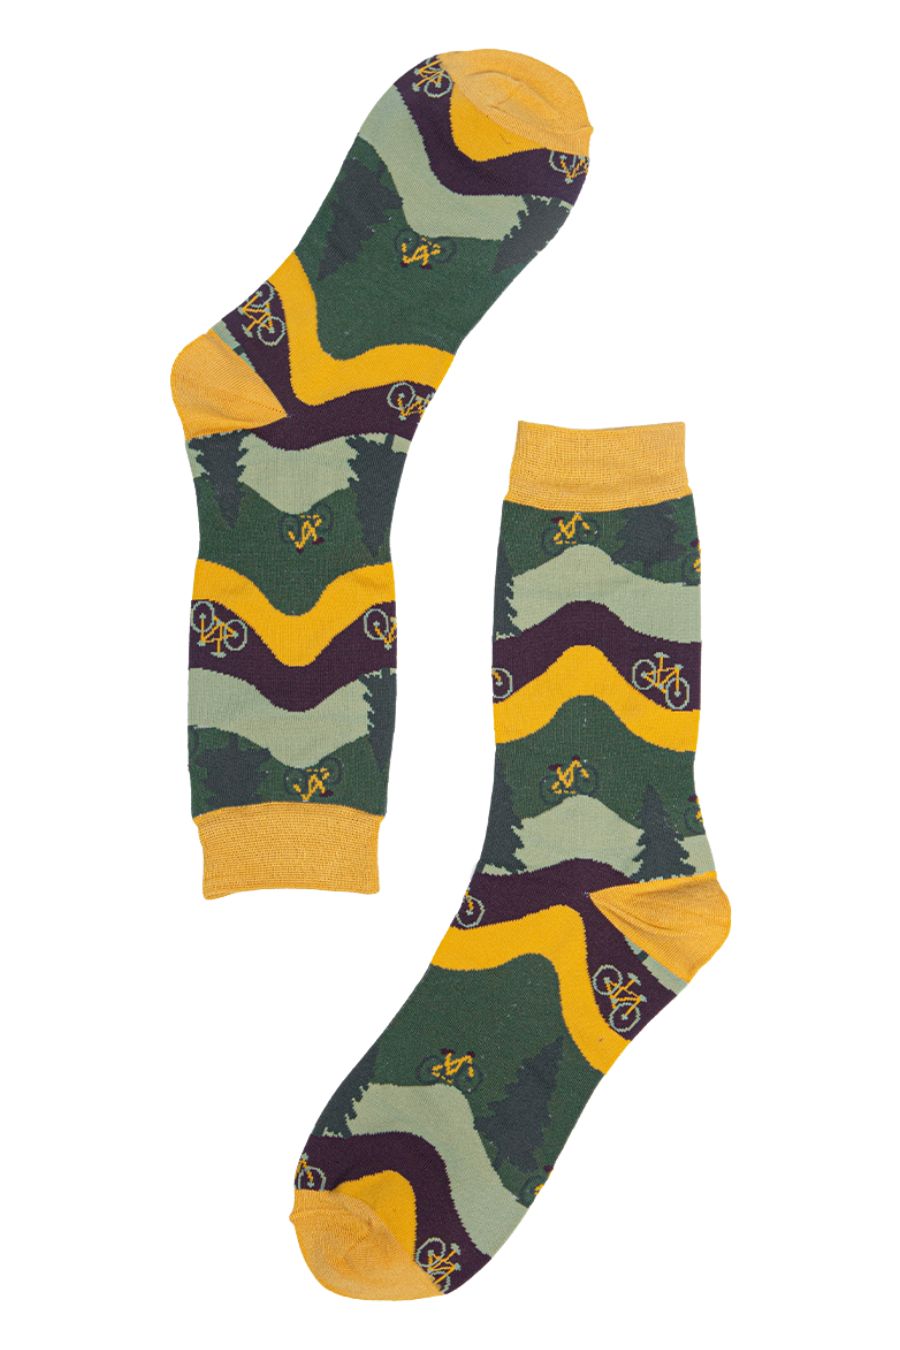 men's dress socks featuring bicycles and trees